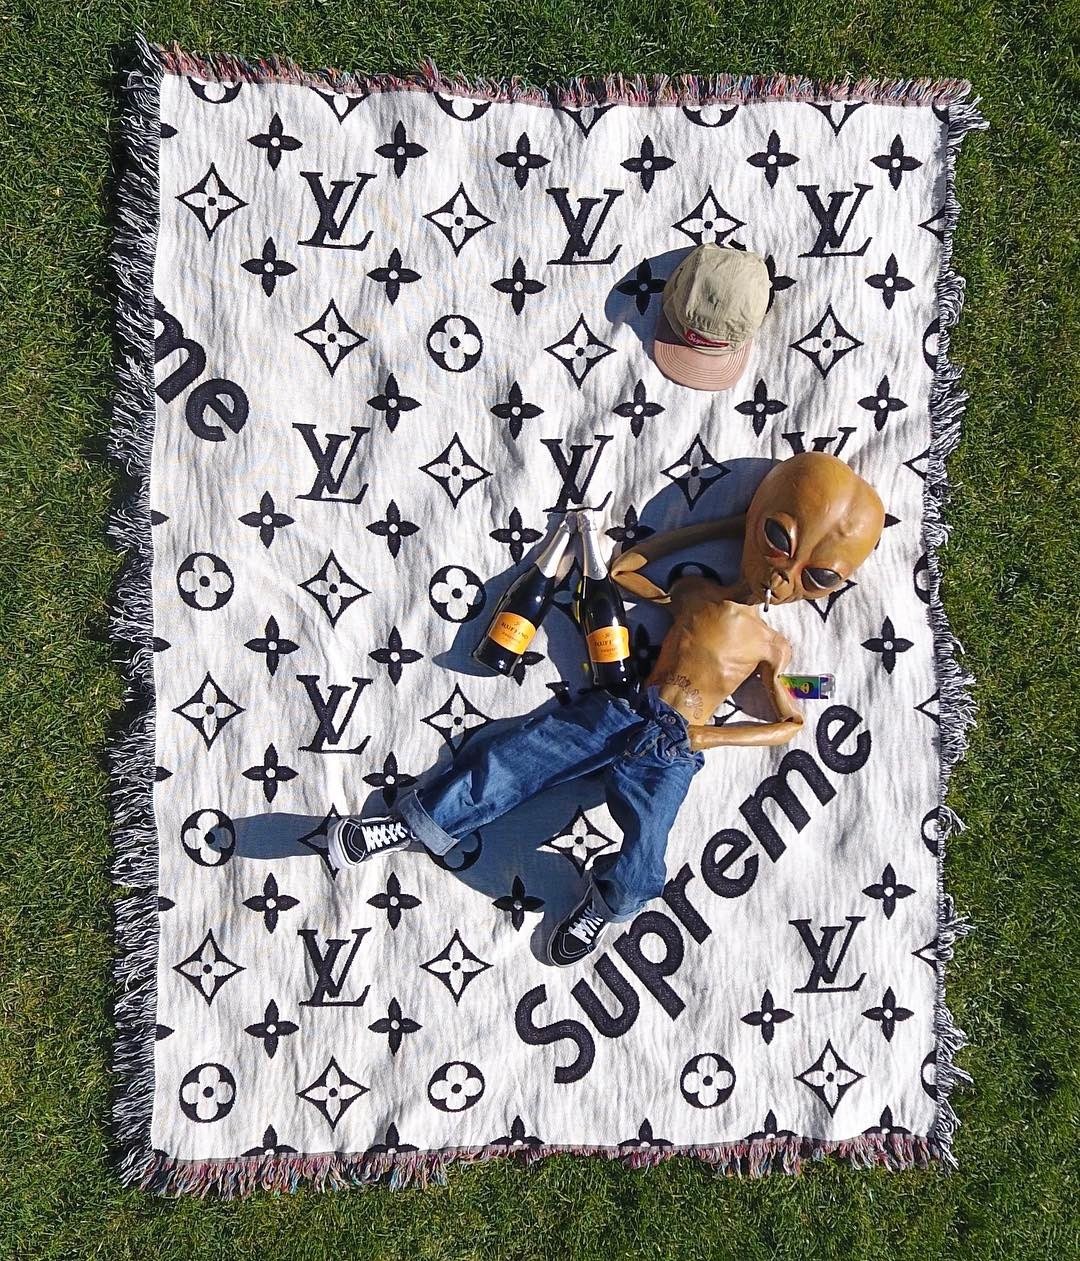 Lil Mayo spotted on Louis Vuitton & Supreme collaborative blanket